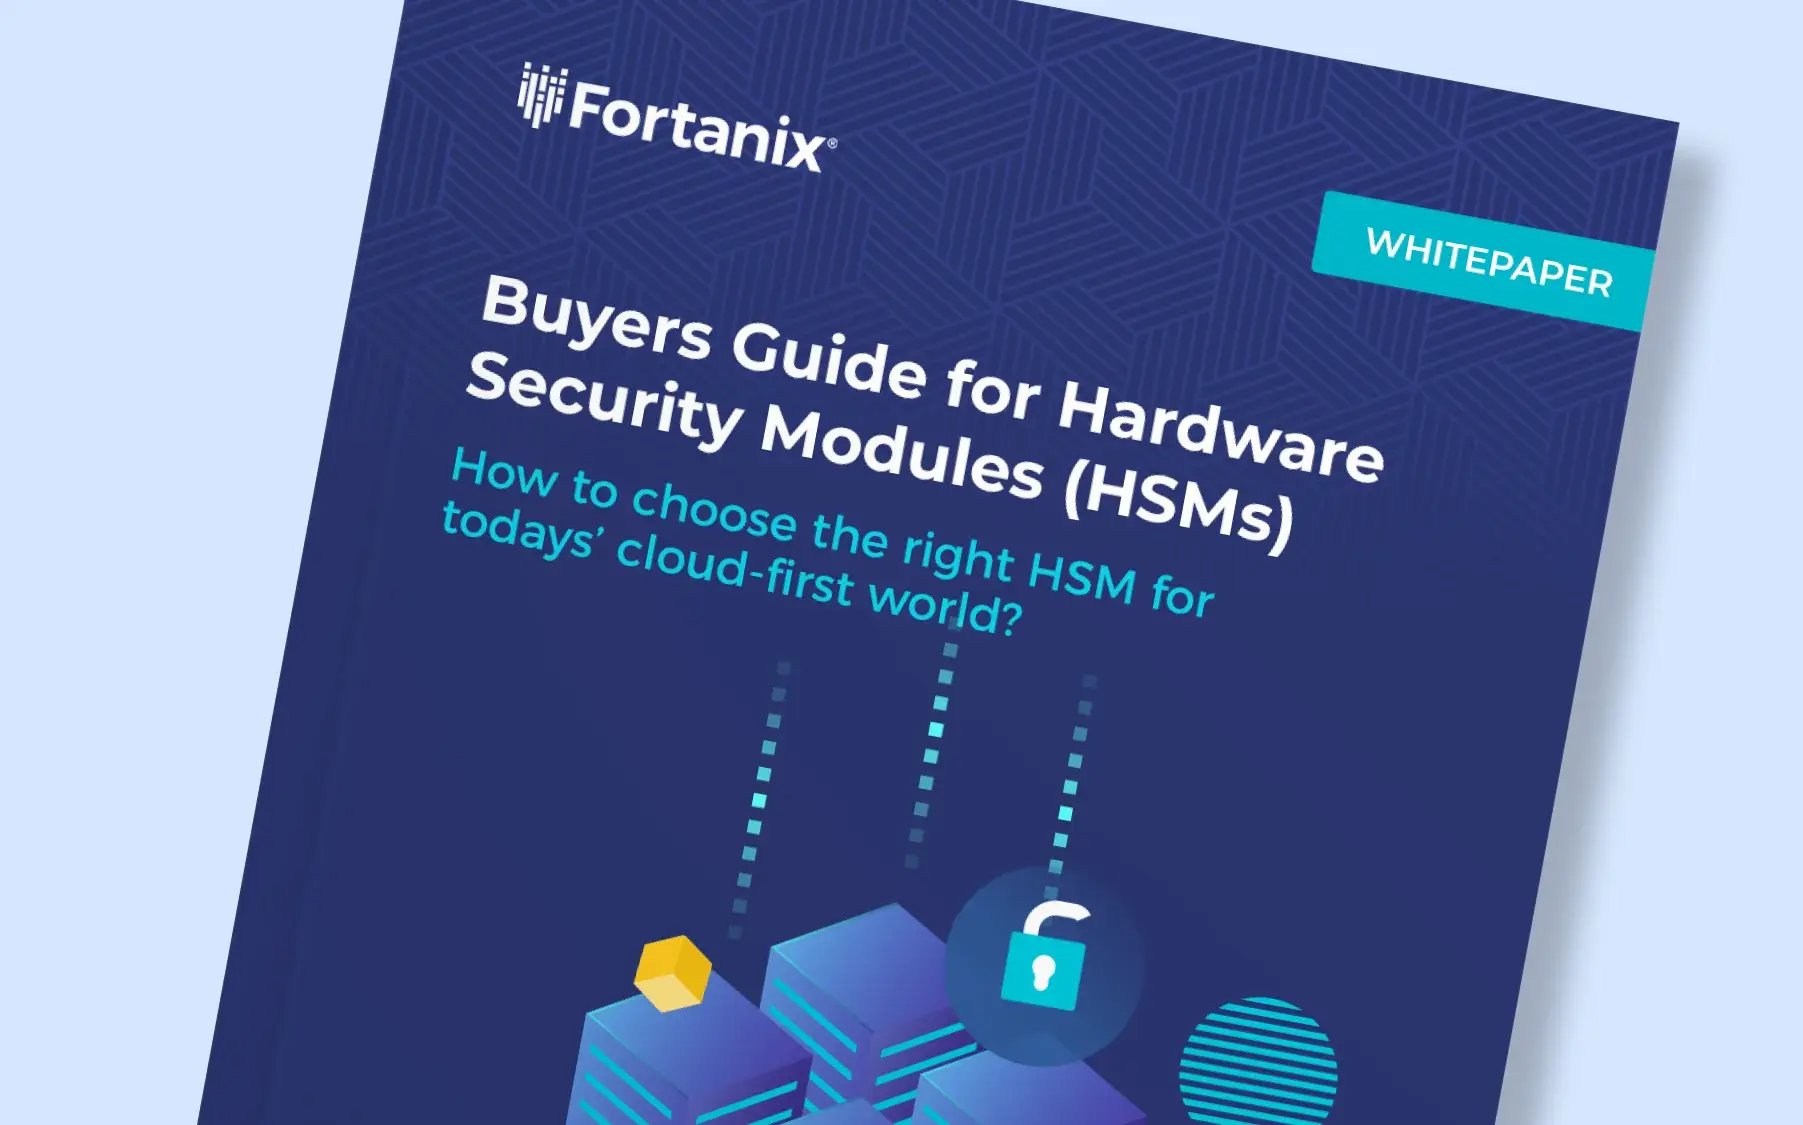 Buyers Guide for Hardware Security Modules (HSMs